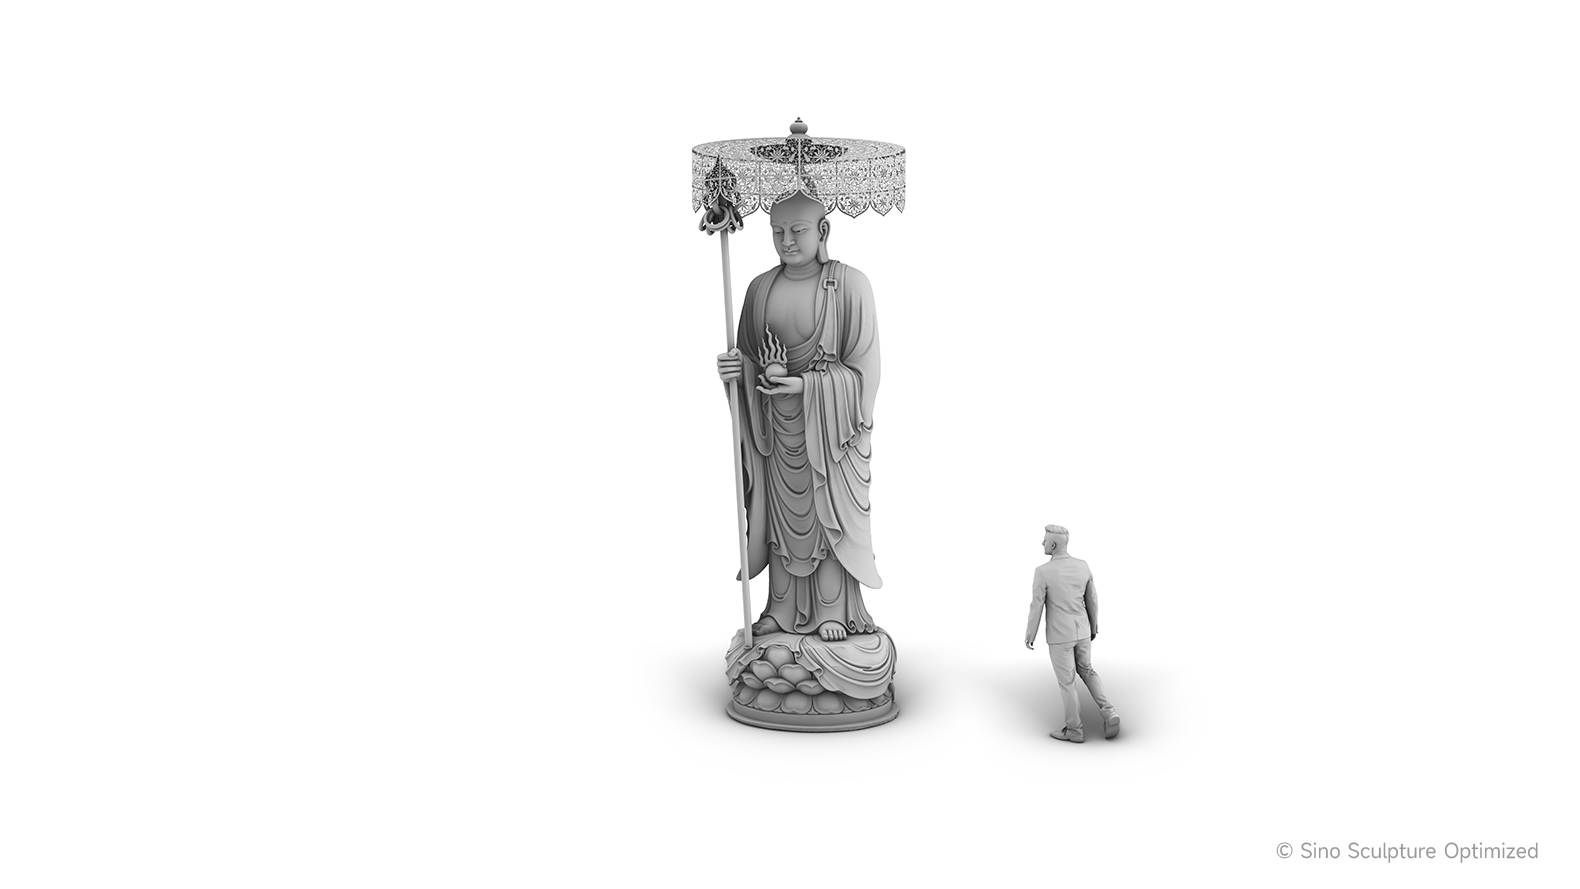 The 3D model of the gold leaf Buddha statue statue